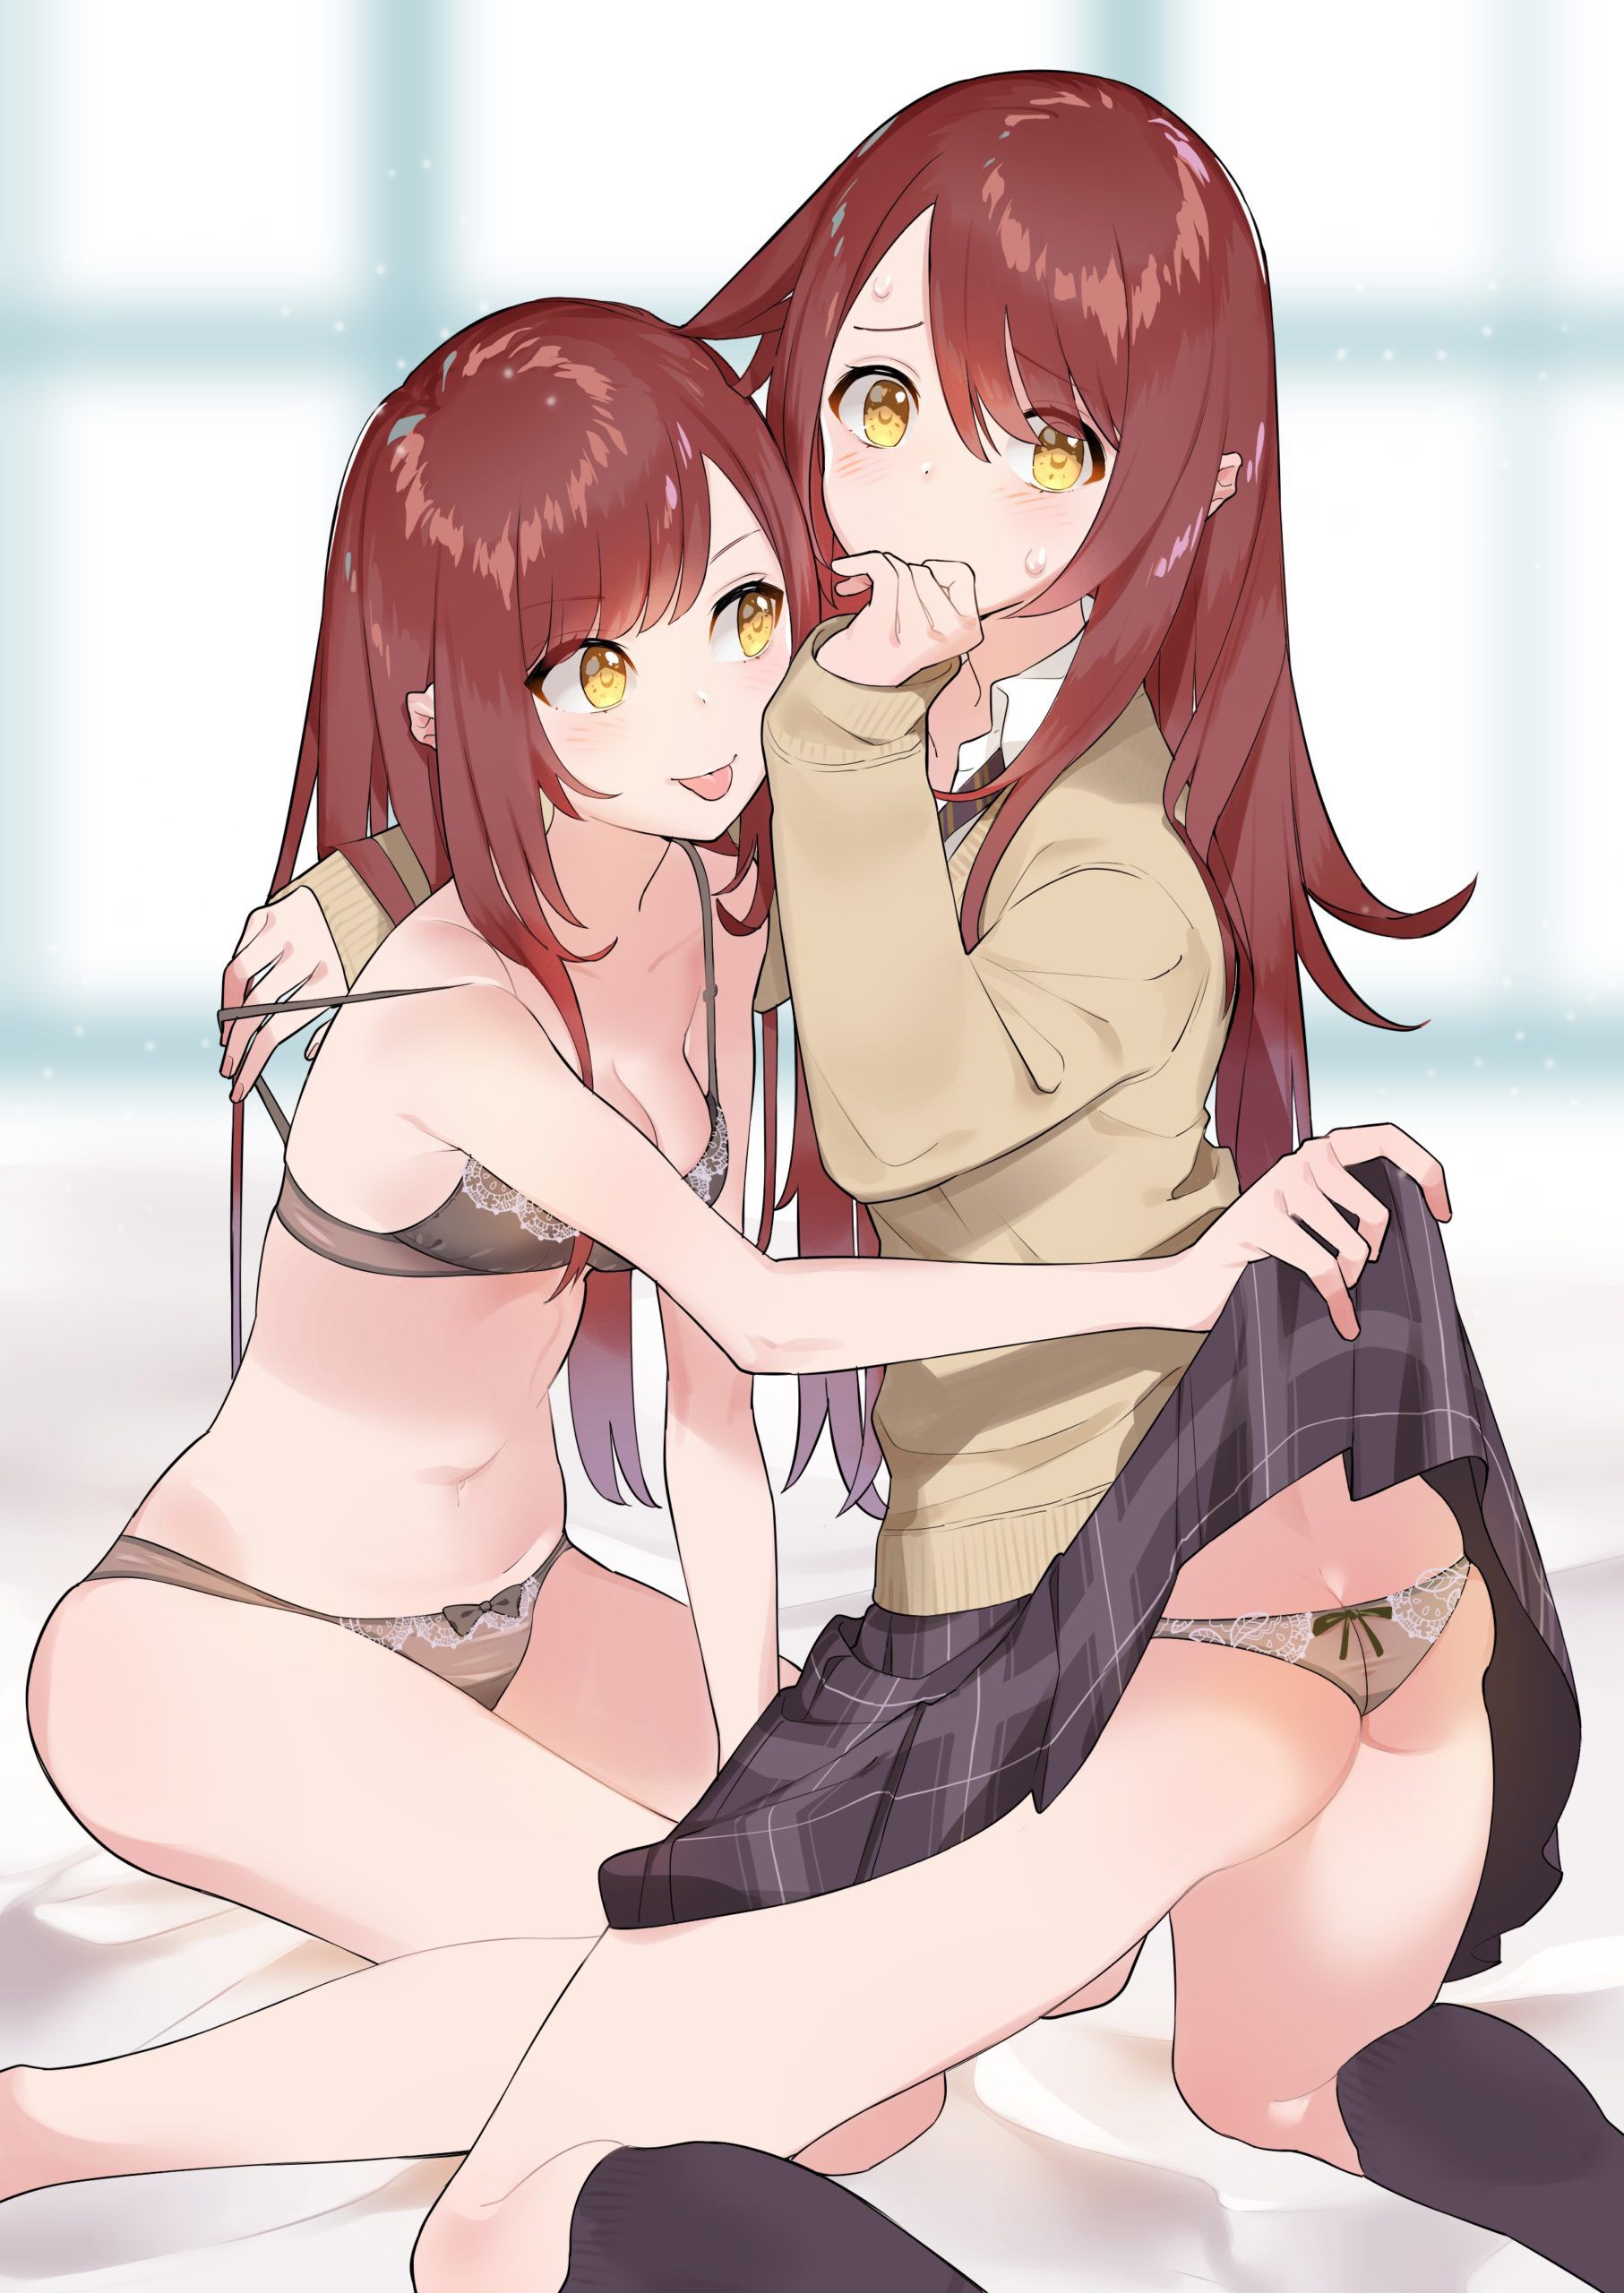 I envy you. Mix me too! Yuri two-dimensional erotic image between girls who are relentless in Lezplay 6